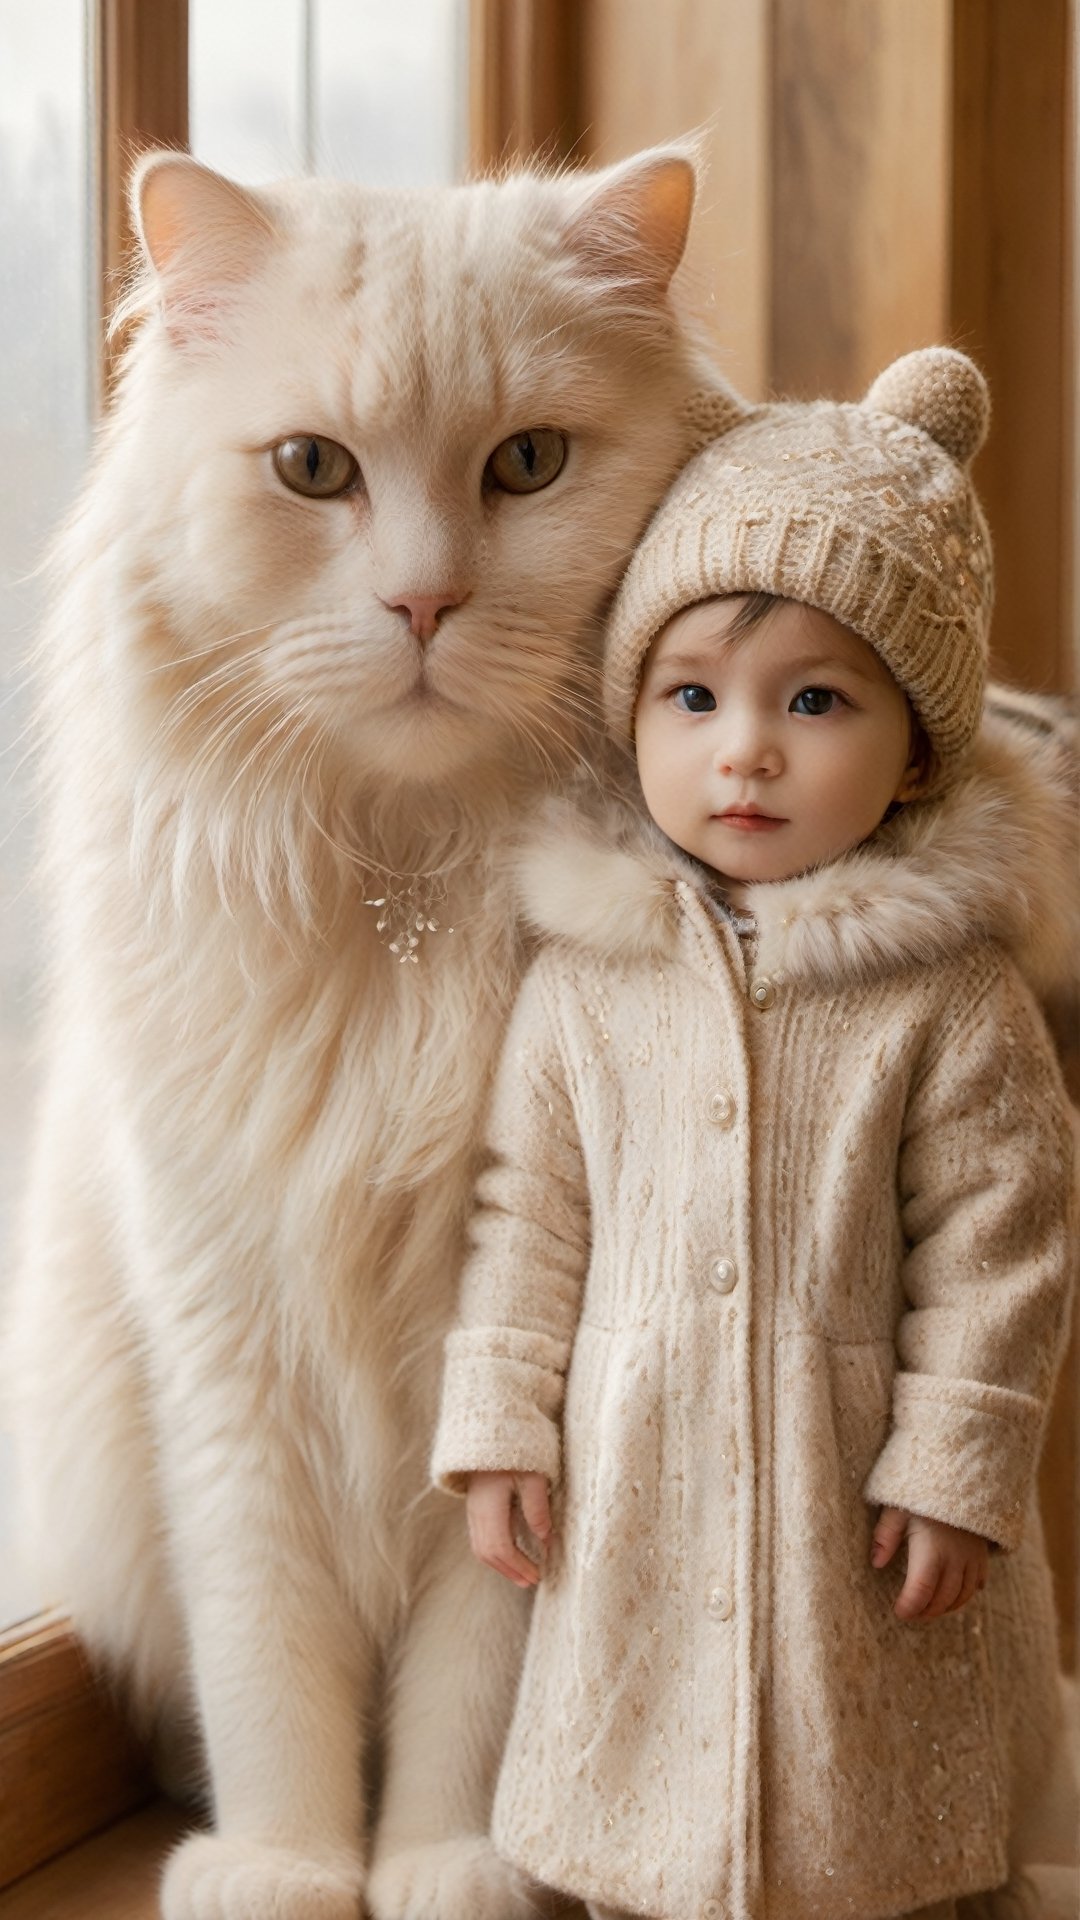 A fluffy white cat with long hair and soft fur, wearing an elegant beige outfit, stands beside the babyboy in his cute winter hat. The background is adorned with light brown decorations. Captured using a Canon EOS R5 camera with a macro lens in natural daylight streaming through large windows. High resolution, hyperrealistic, intricate details, warm tones